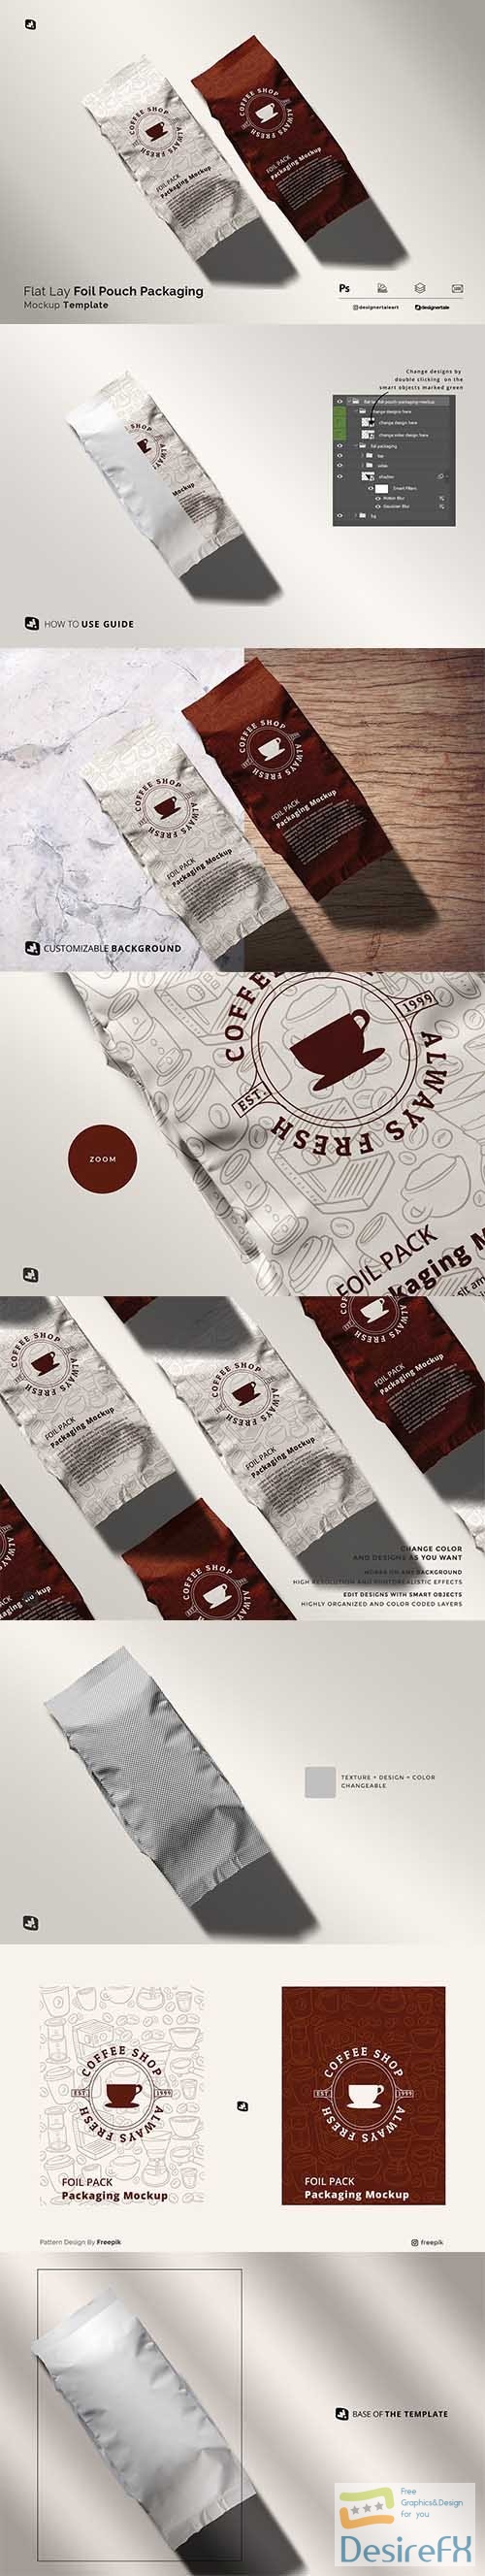 CreativeMarket - Flat Lay Foil Pouch Packaging Mockup 6276345